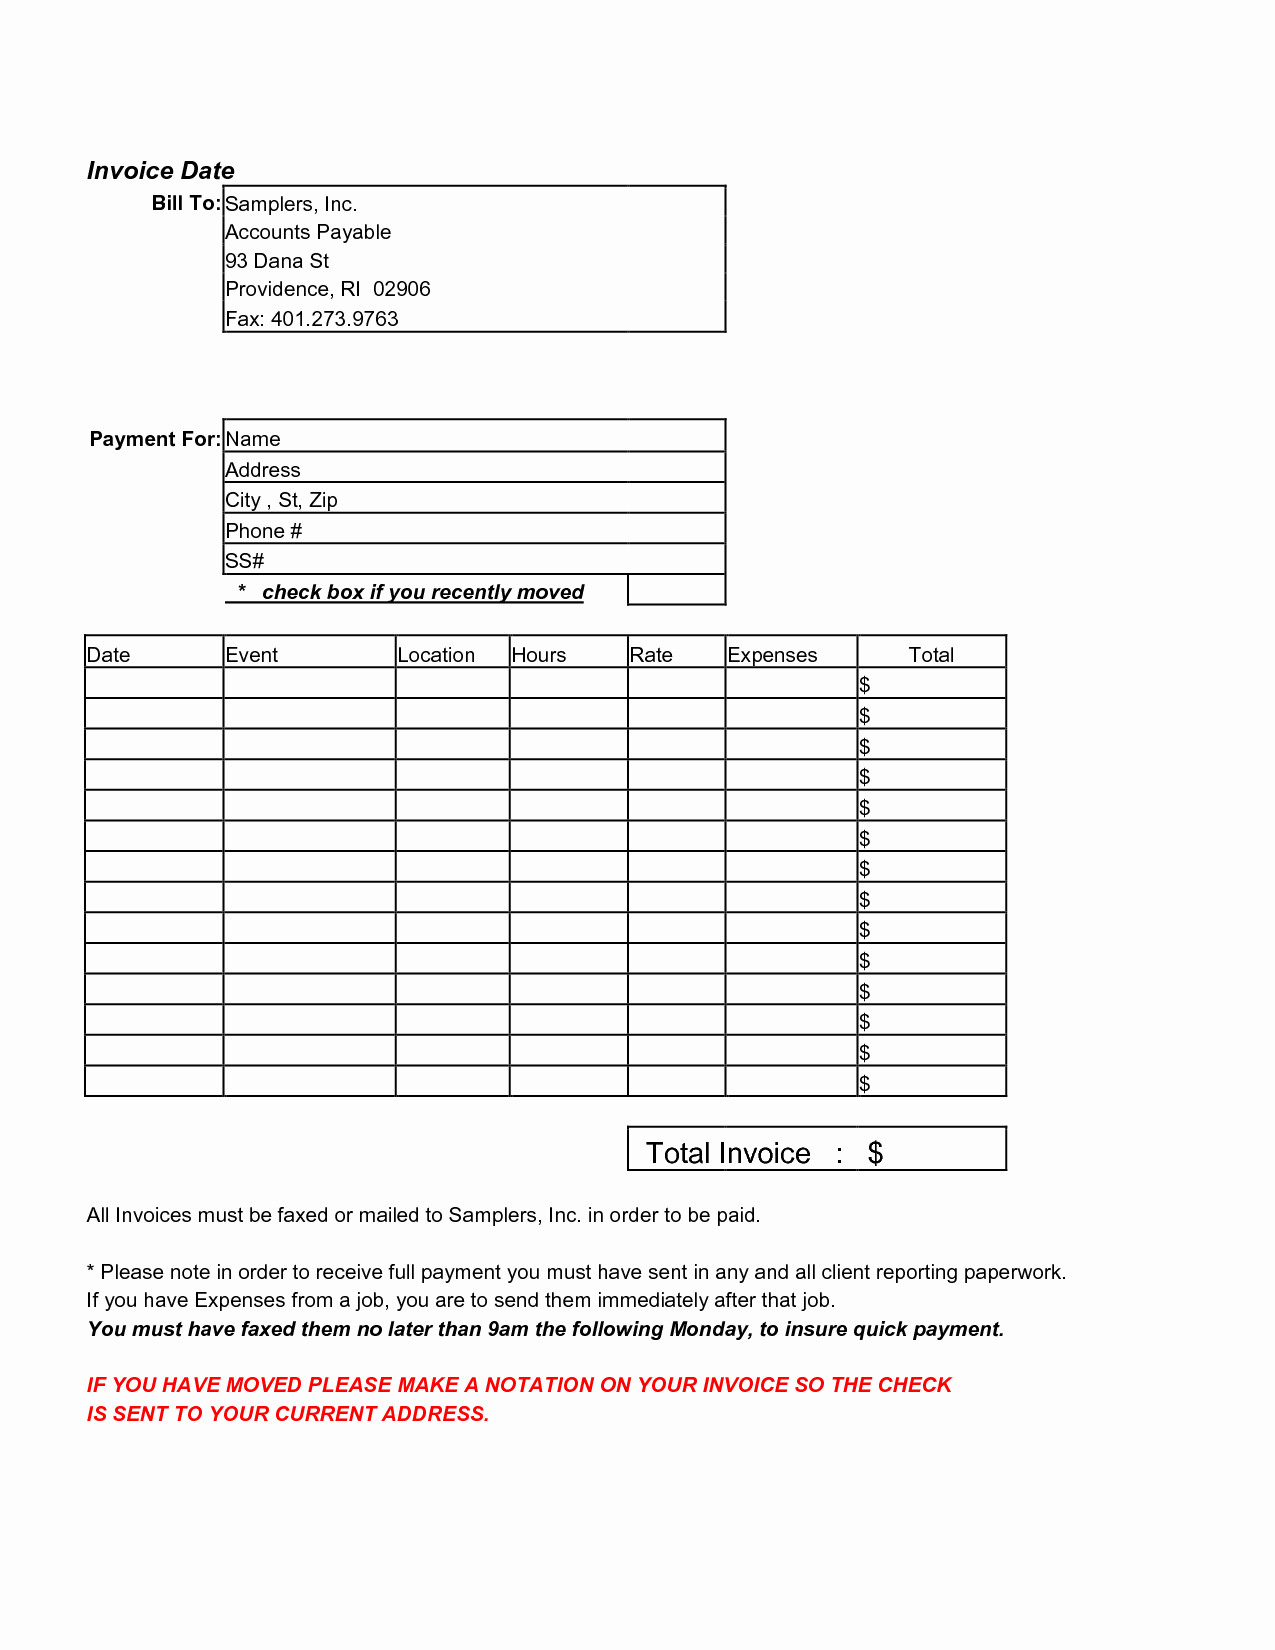 Invoice Spreadsheet Template Free Lovely Independent Contractor Invoice Template Free